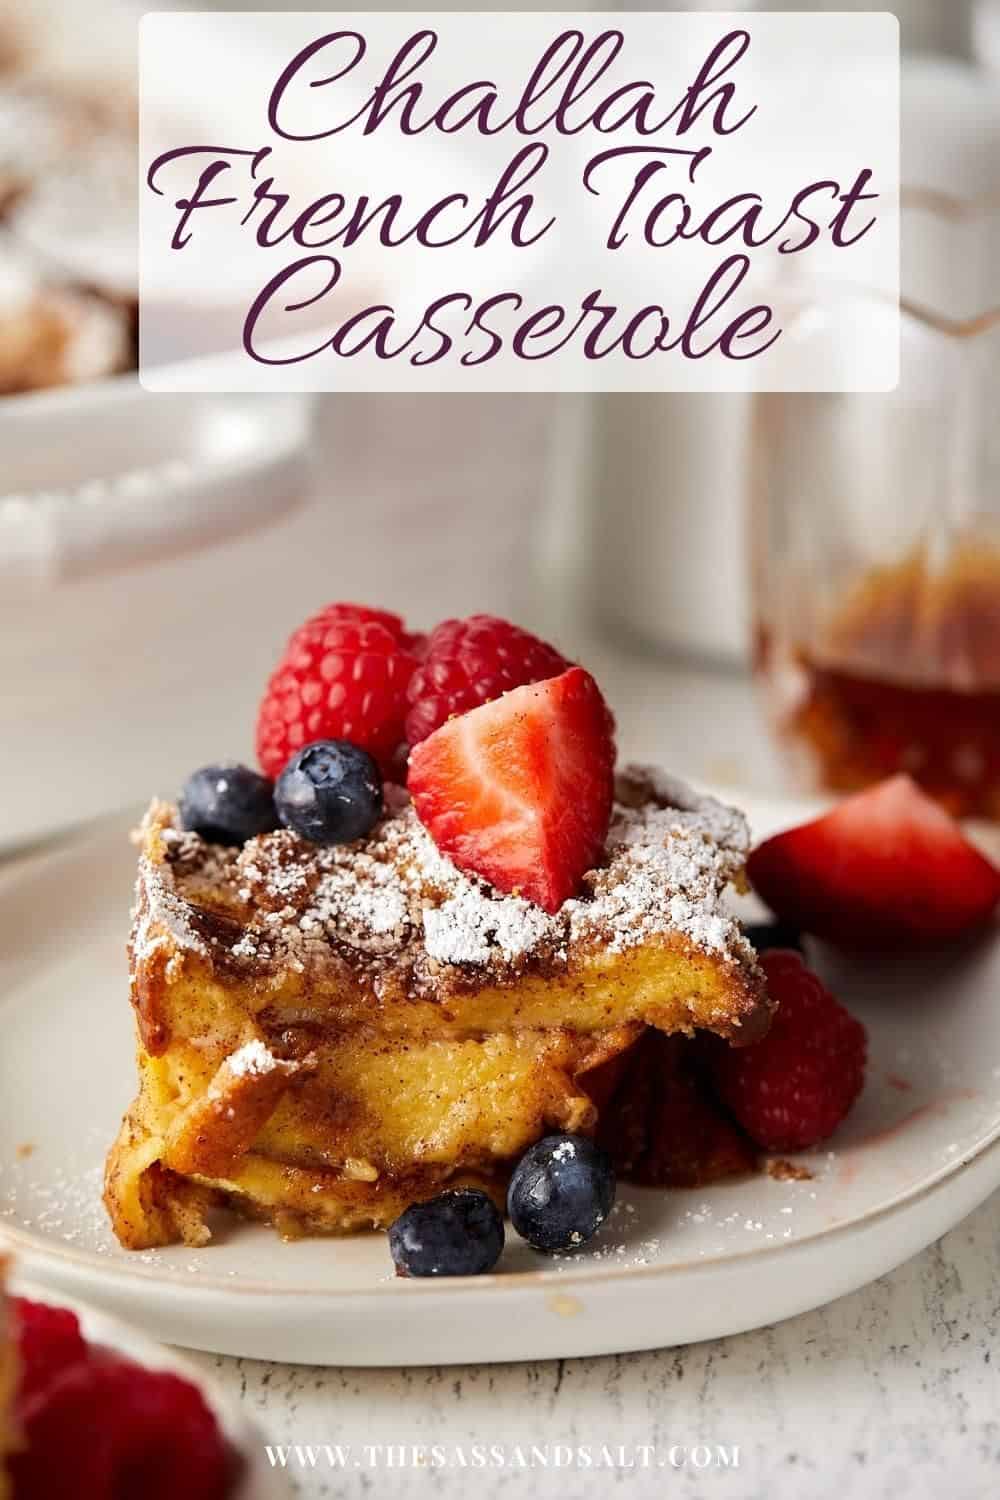 Close up view of challah french toast casserole on a plate with fruit on top.